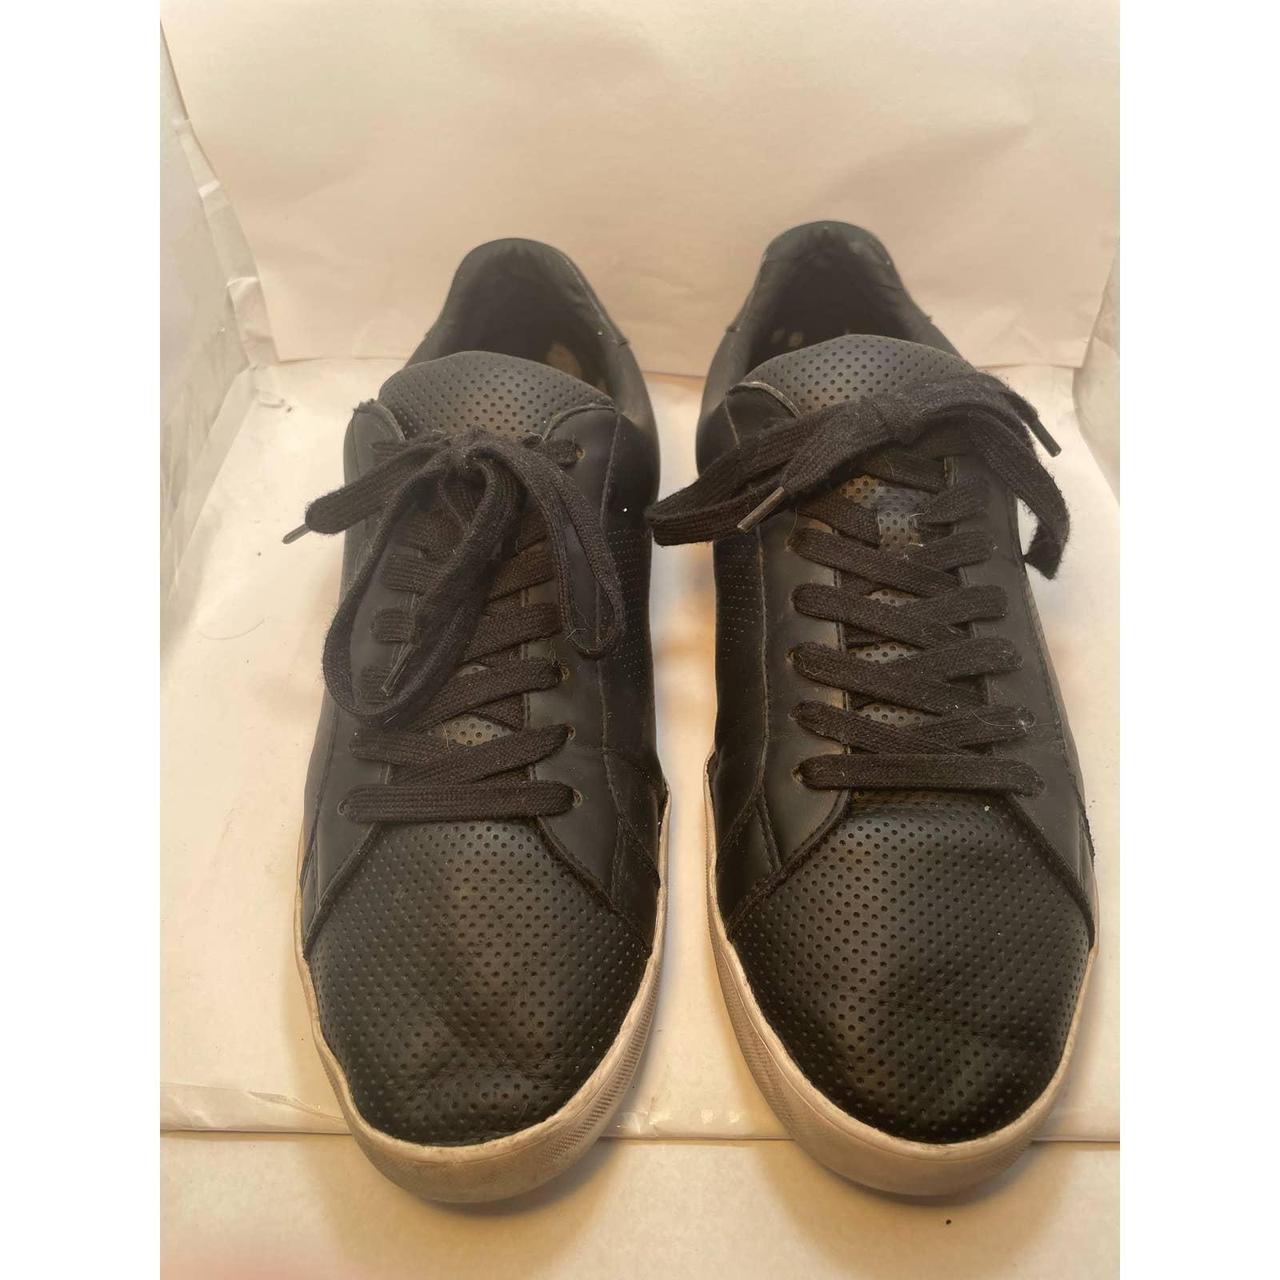 Black perforated shoes by Zara man in good condition... - Depop